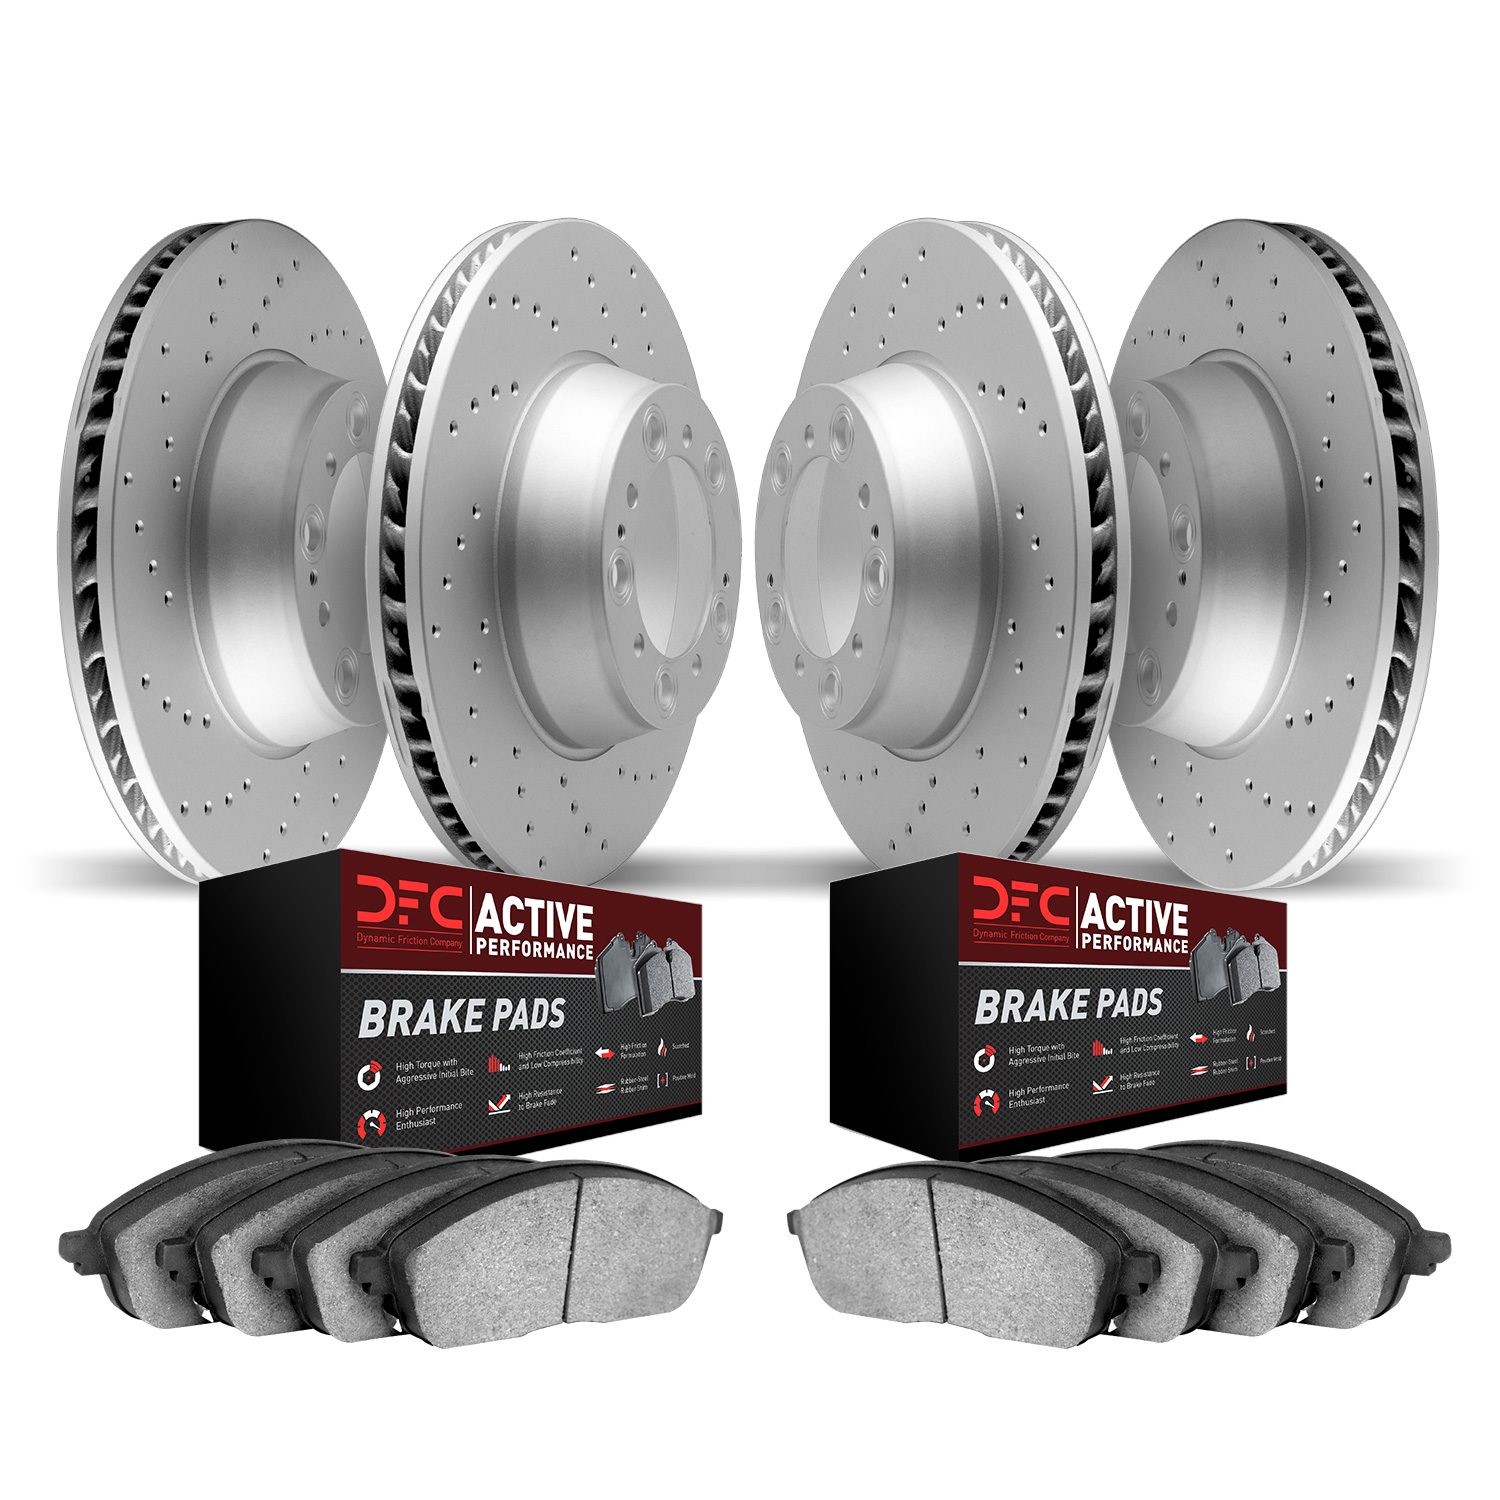 2704-75010 Geoperformance Drilled Brake Rotors with Active Performance Pads Kit, 2011-2013 Lexus/Toyota/Scion, Position: Front a